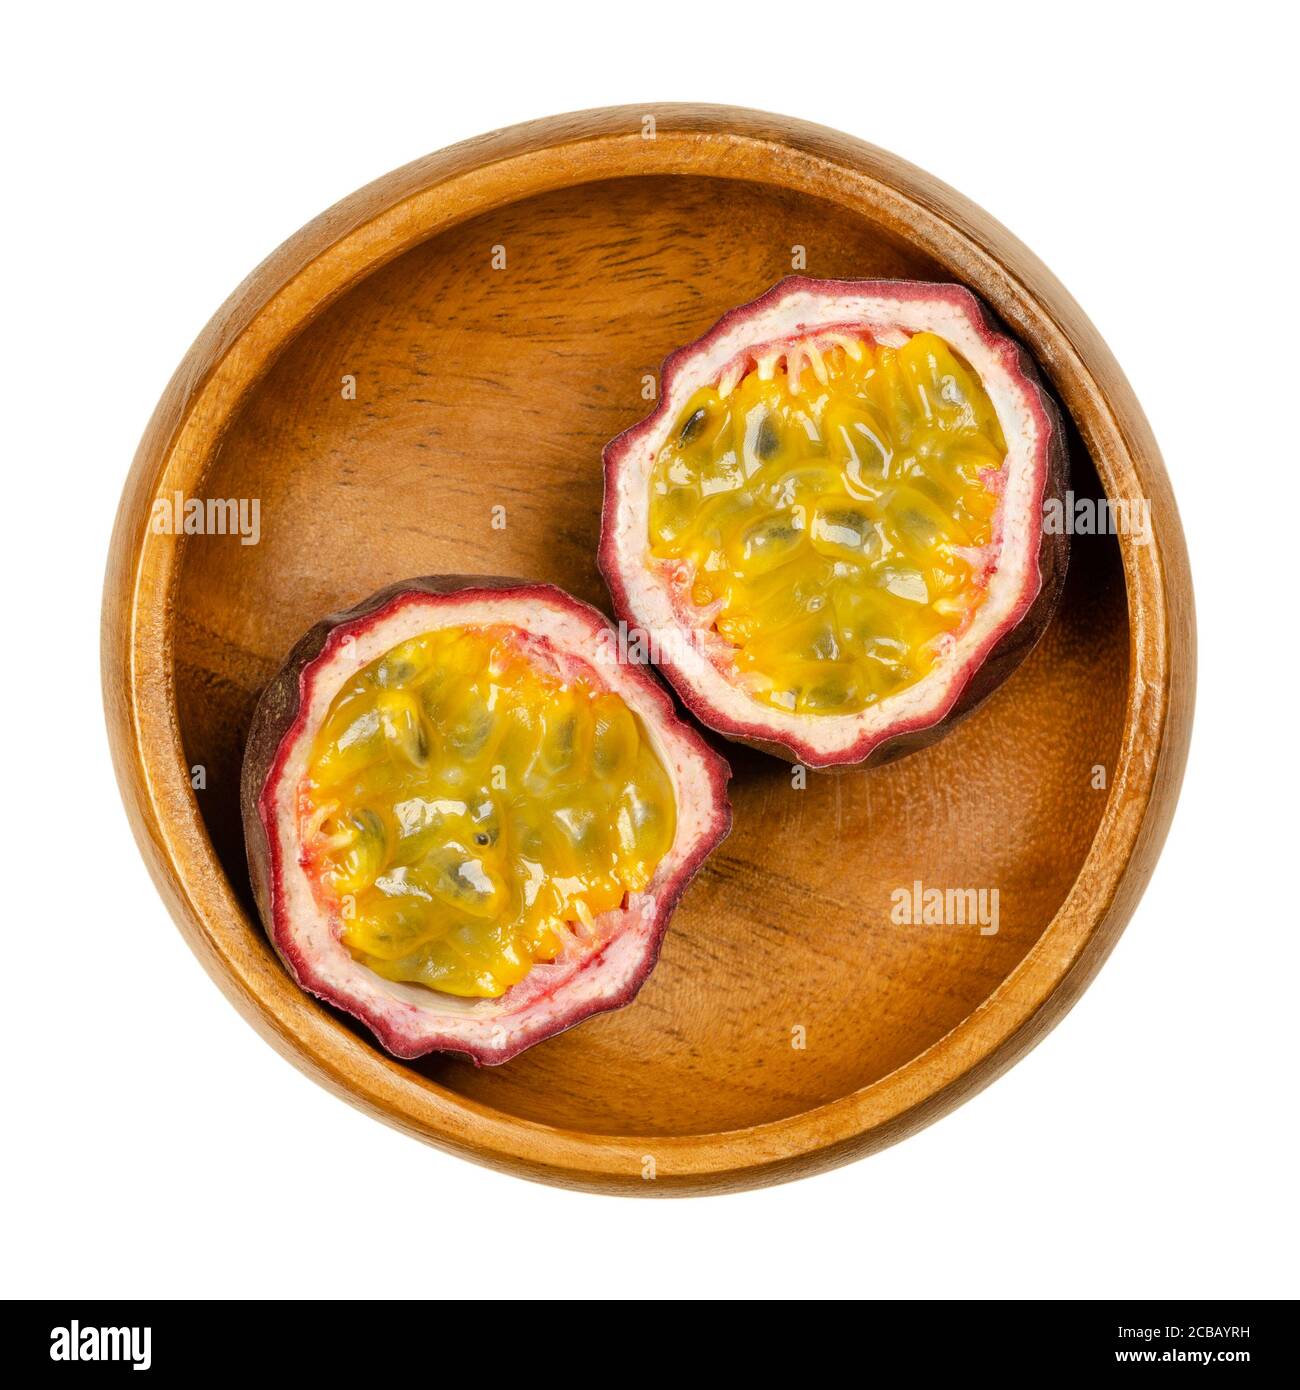 Fresh passion fruit cut in two halves, in wooden bowl. Fruits with purple skin and yellow flesh with many seeds. Can be eaten raw. Stock Photo